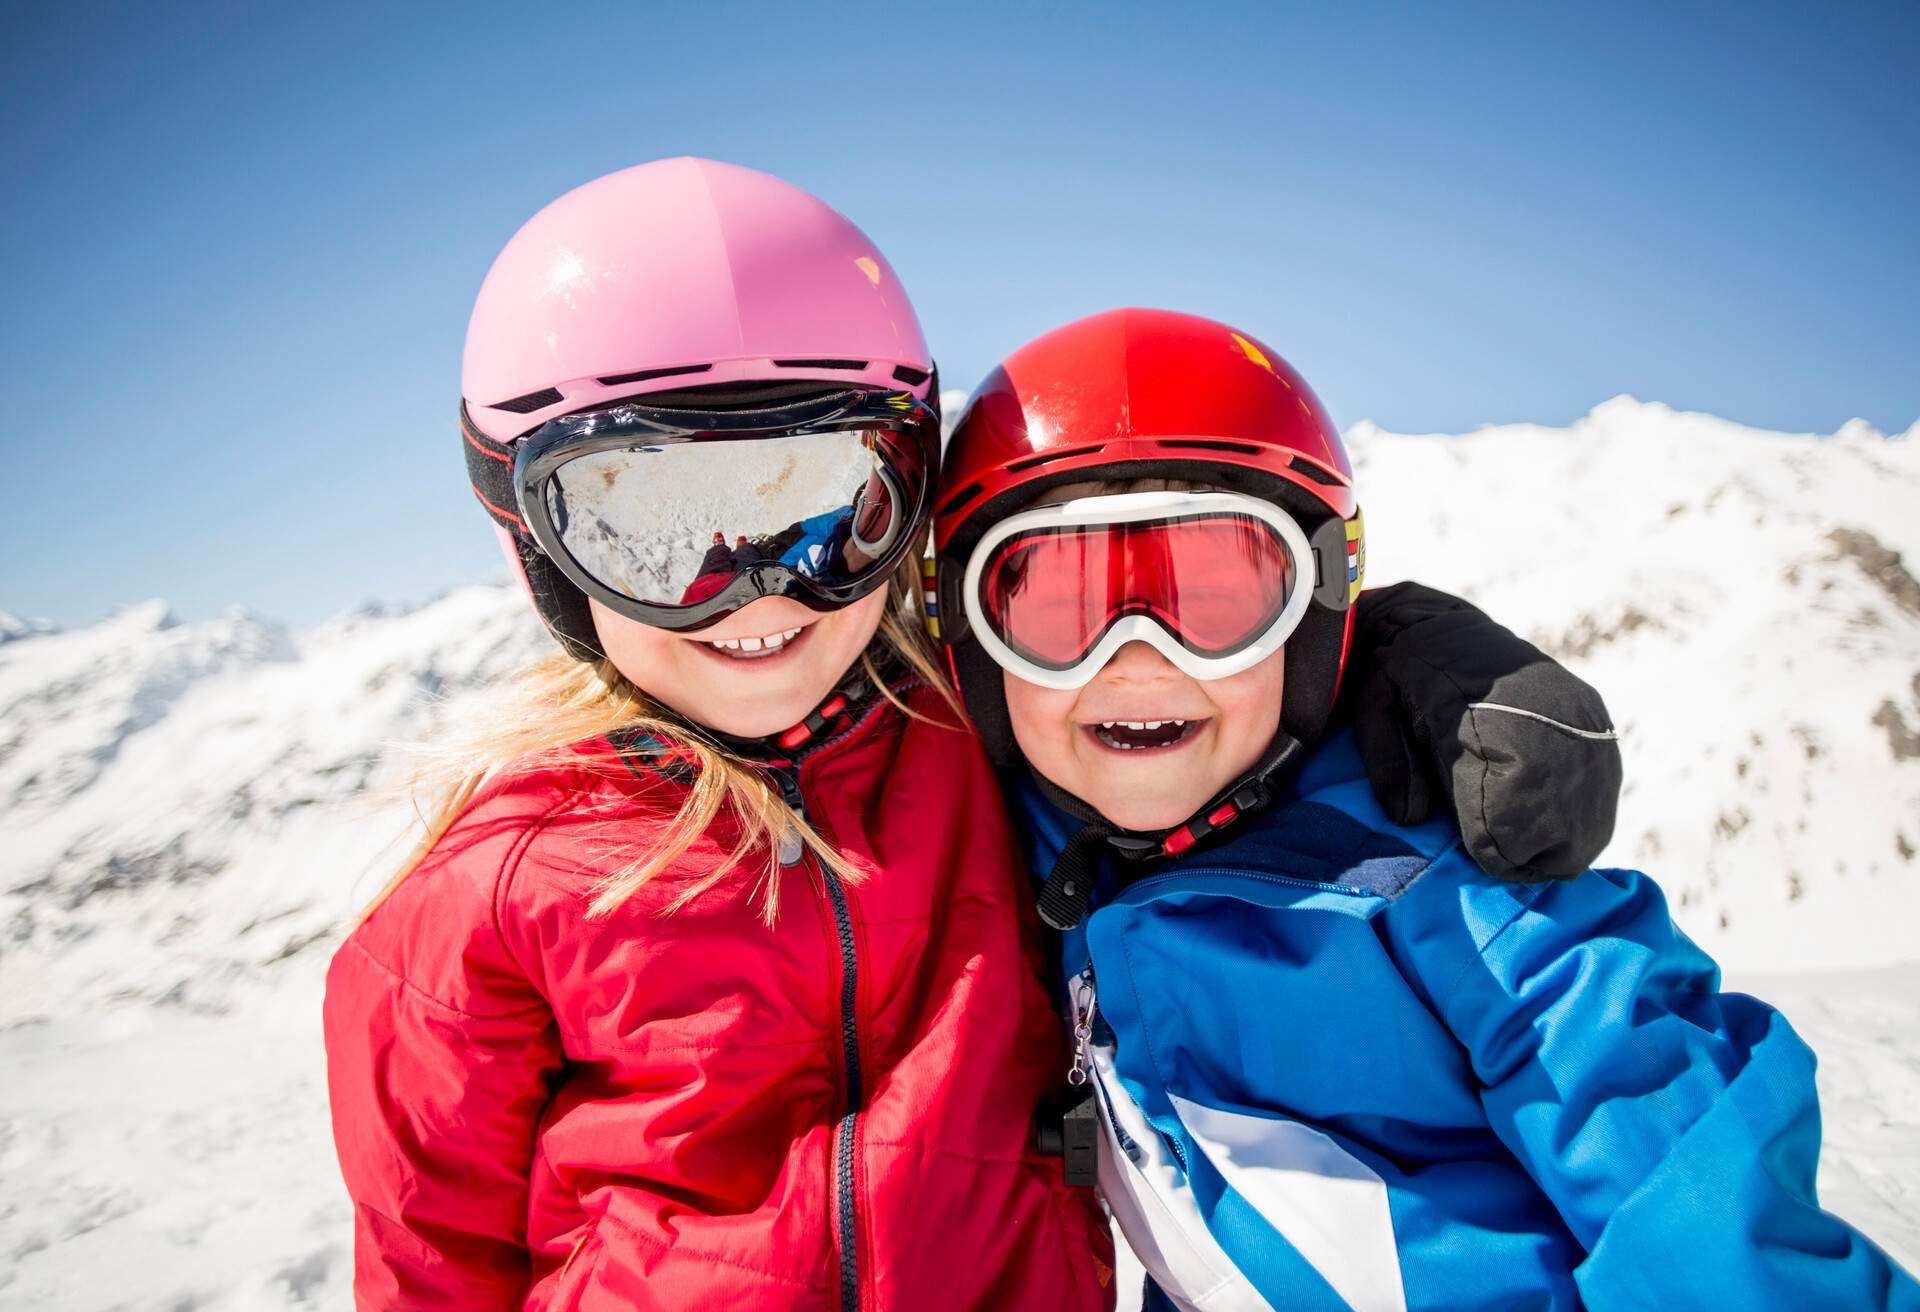 Two joyful kids wearing ski goggles and helmets standing on a snowfield.